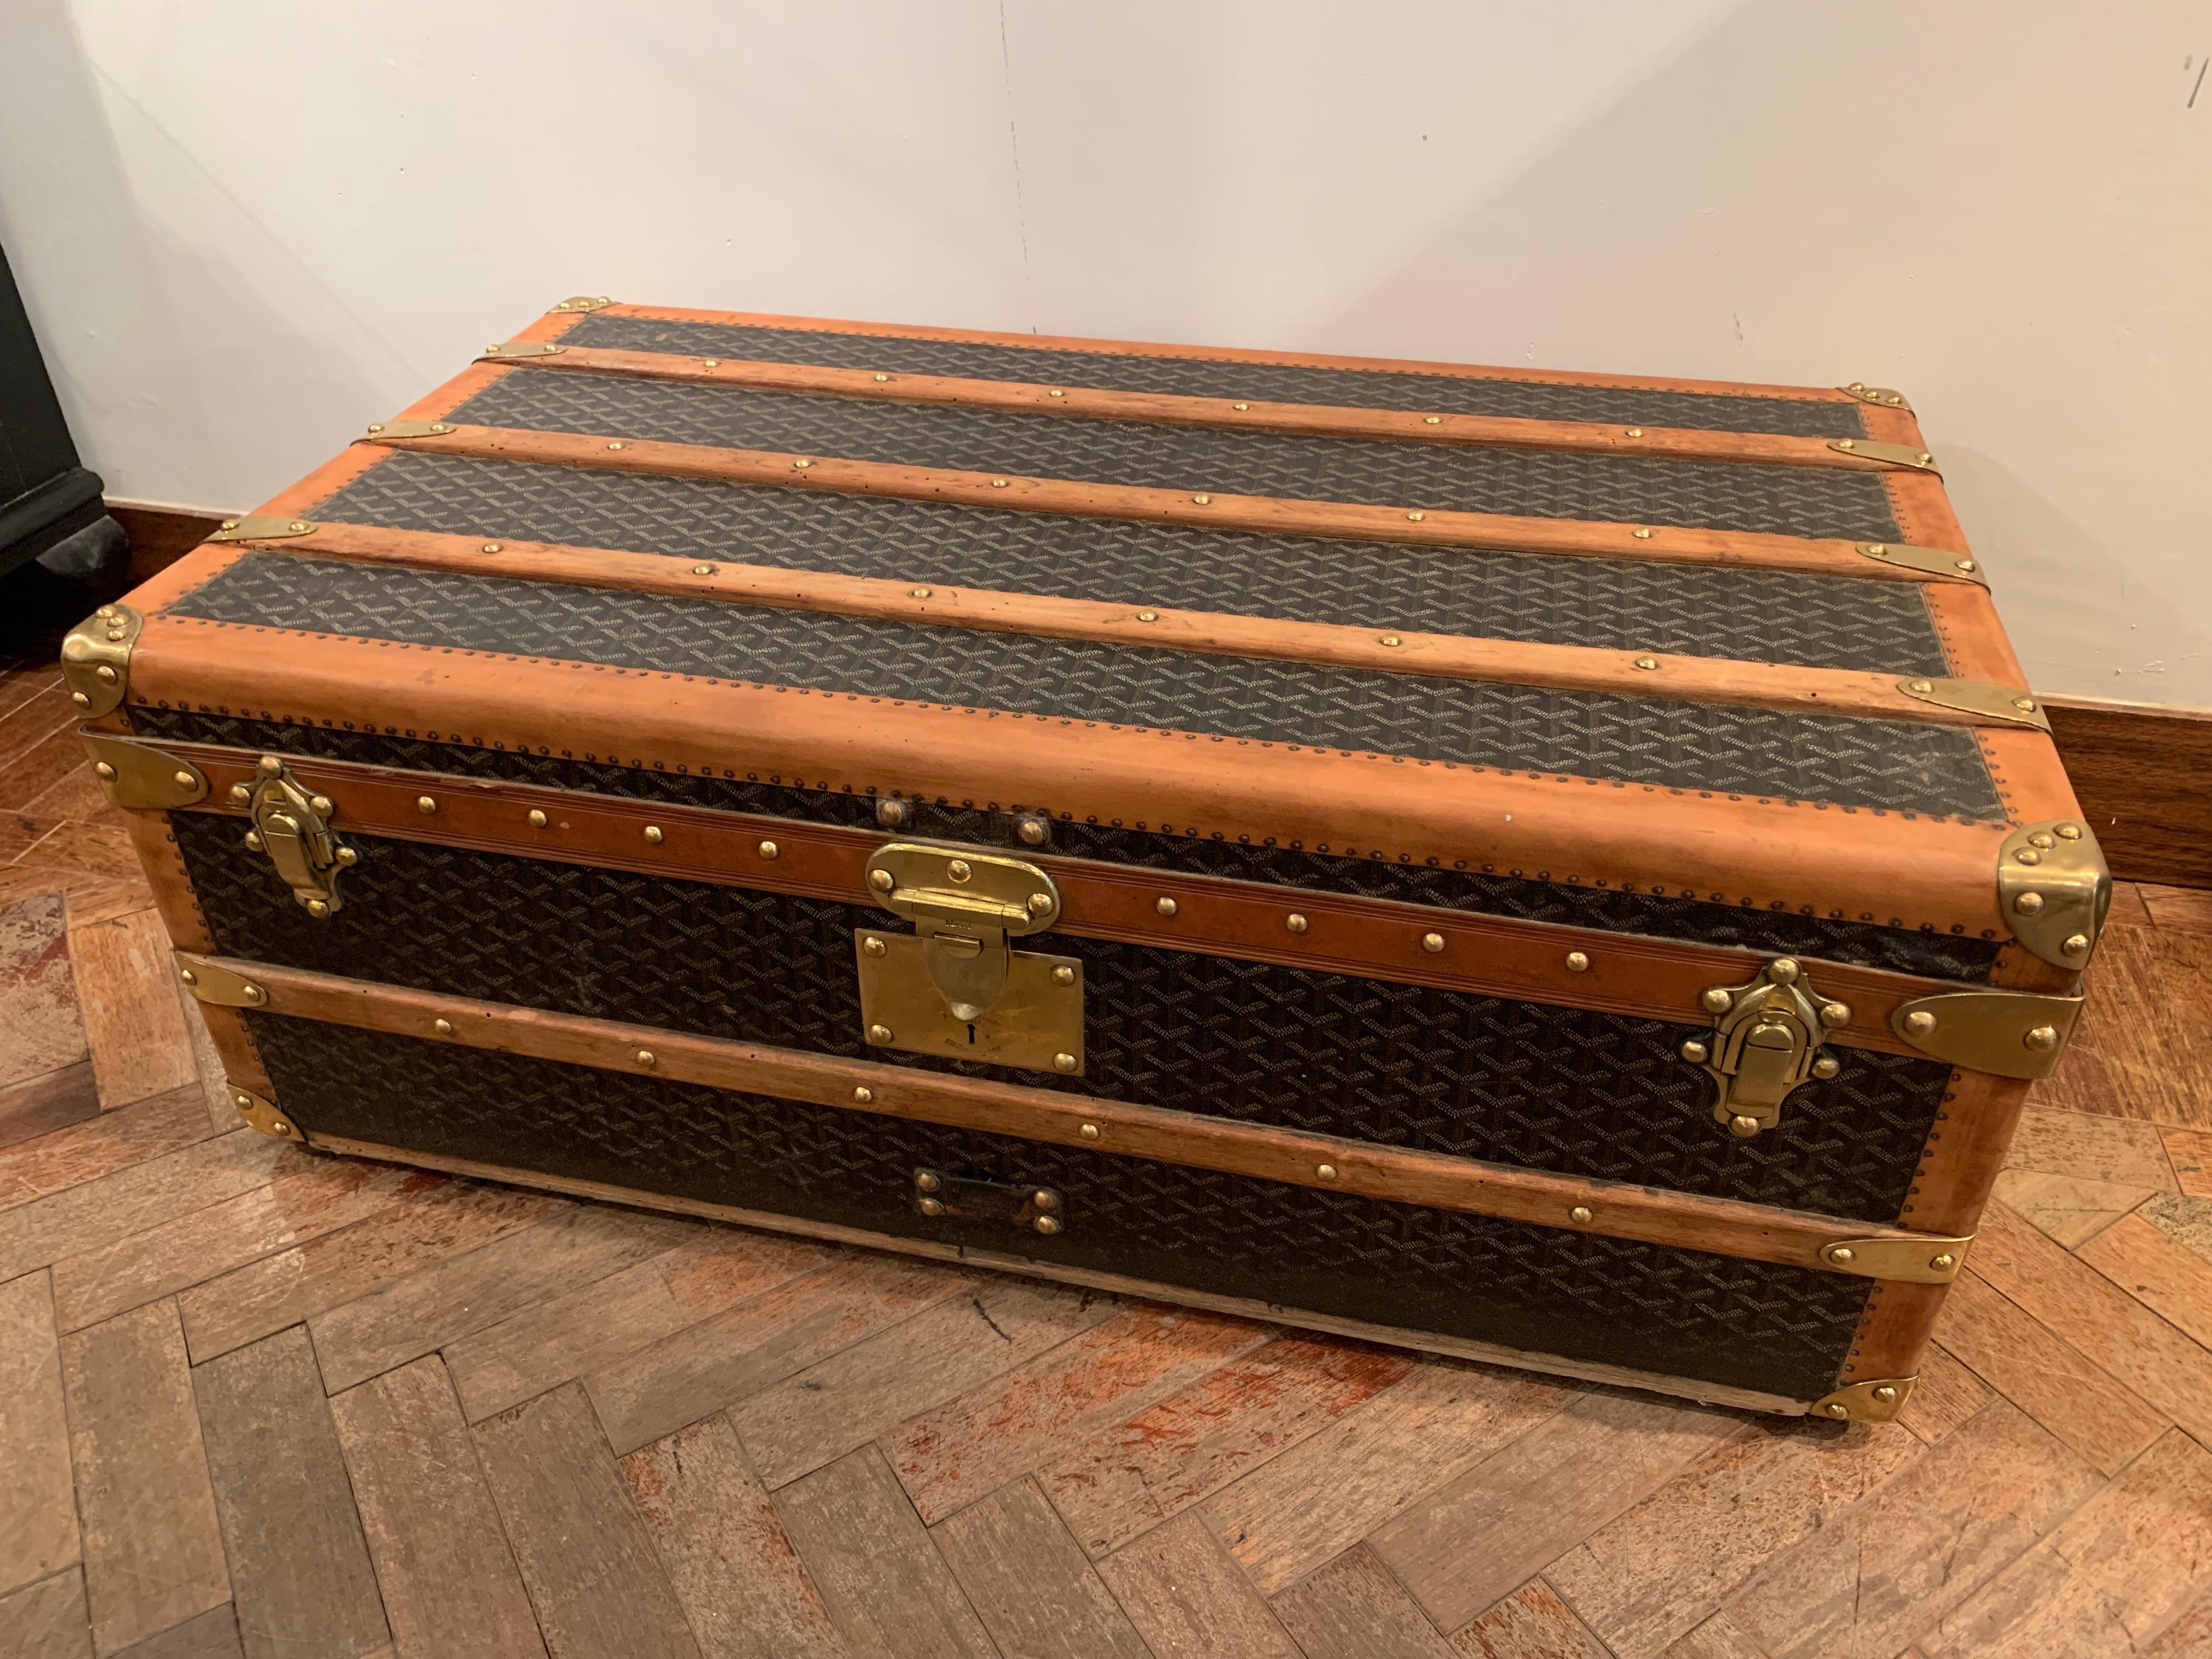 This magnificient Goyard cabin trunk features the famous chevrons pattern canvas, two Goyard brass handles, all corners and nails in Brass and a Goyard central lock.
A small Goyard plaque “Malles Goyard, 233 Rue Saint Honoré, Paris, Monte-carlo,